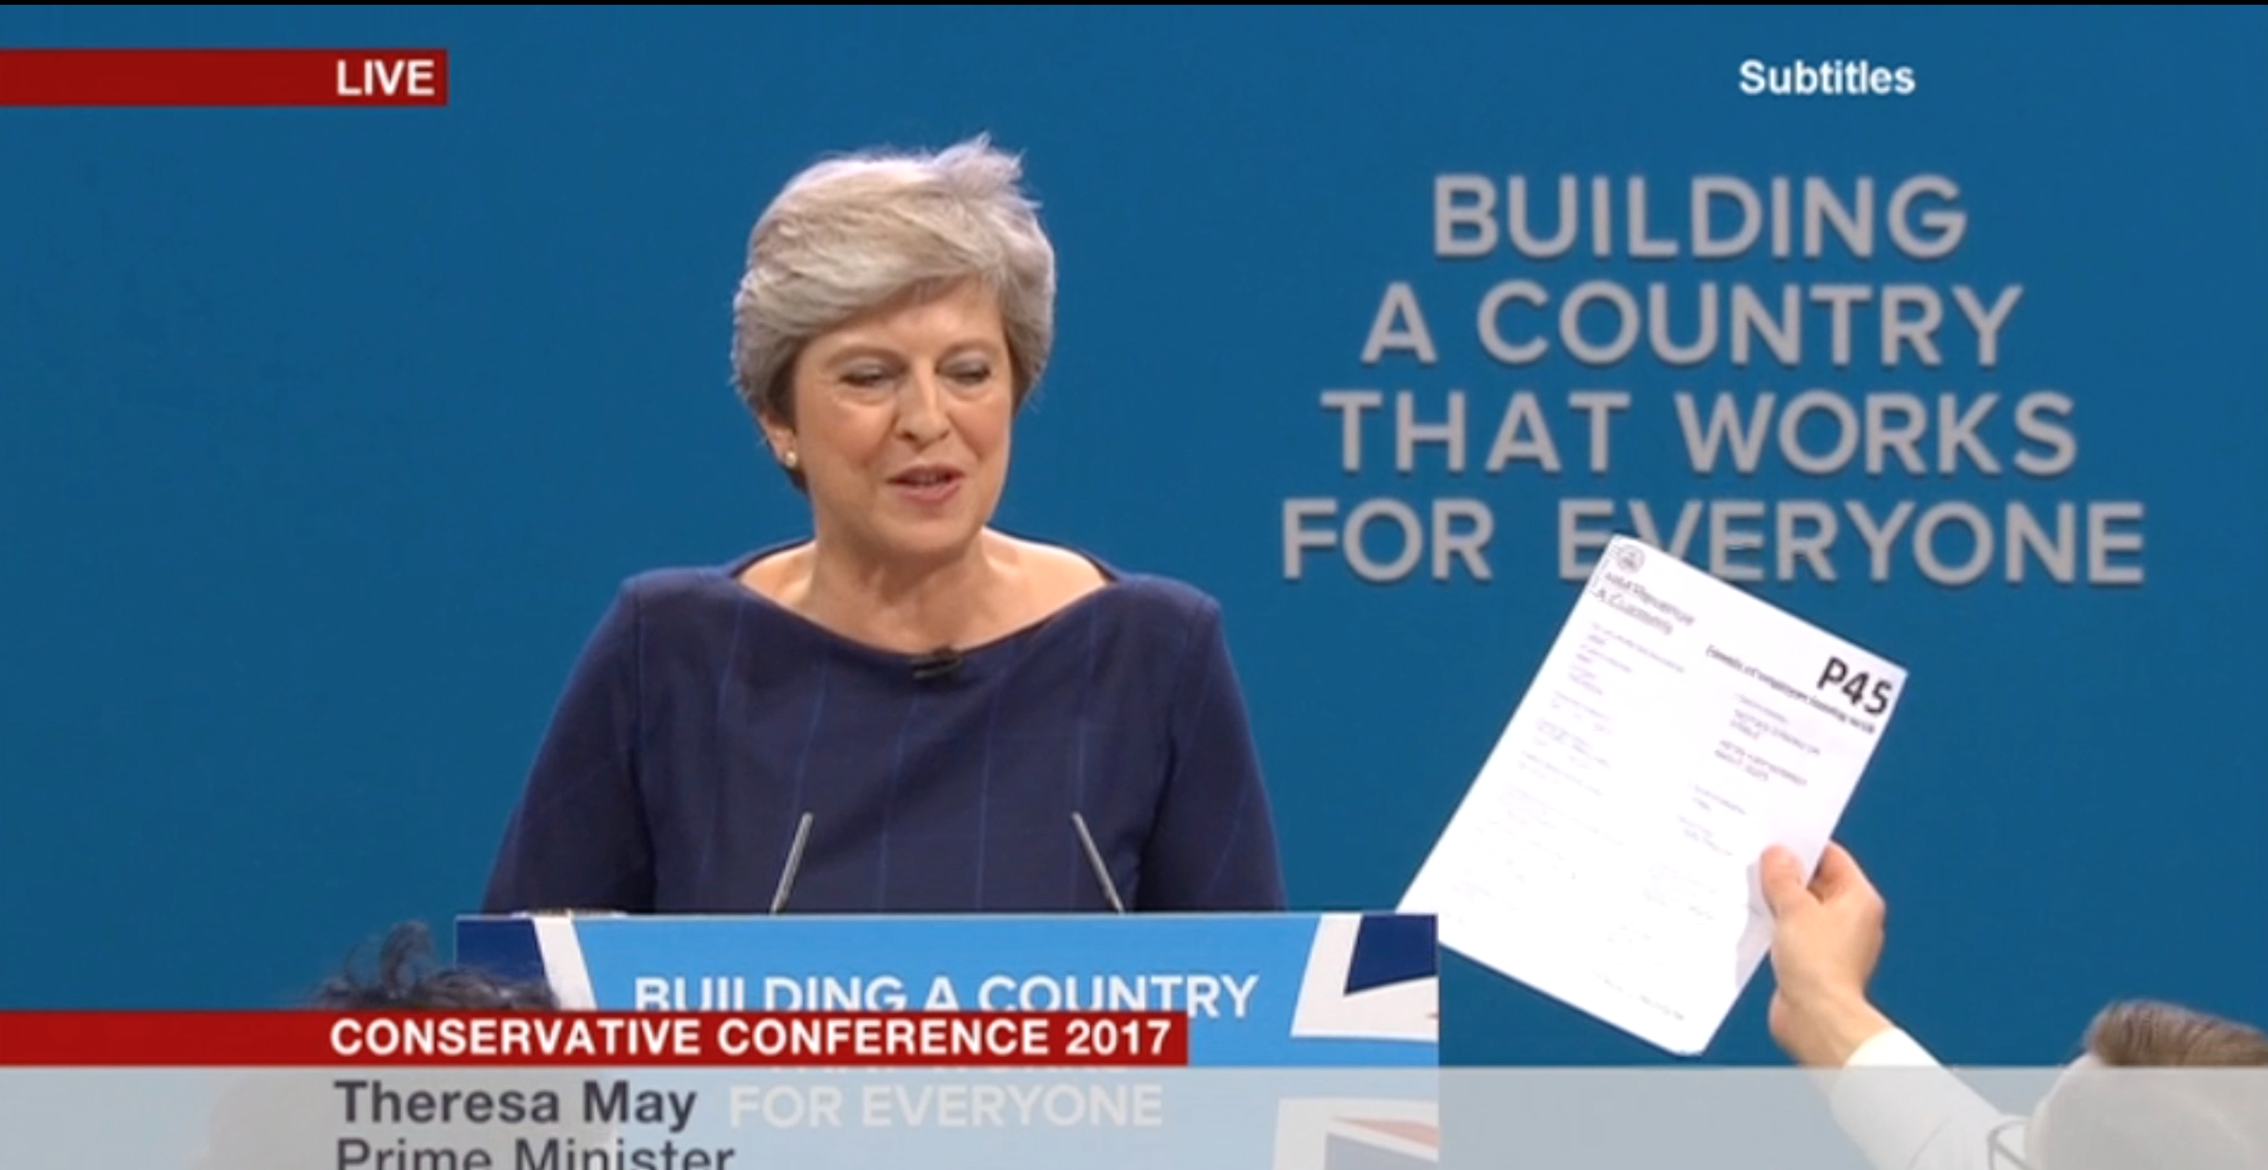 Theresa May Handed P45 Tory Conference